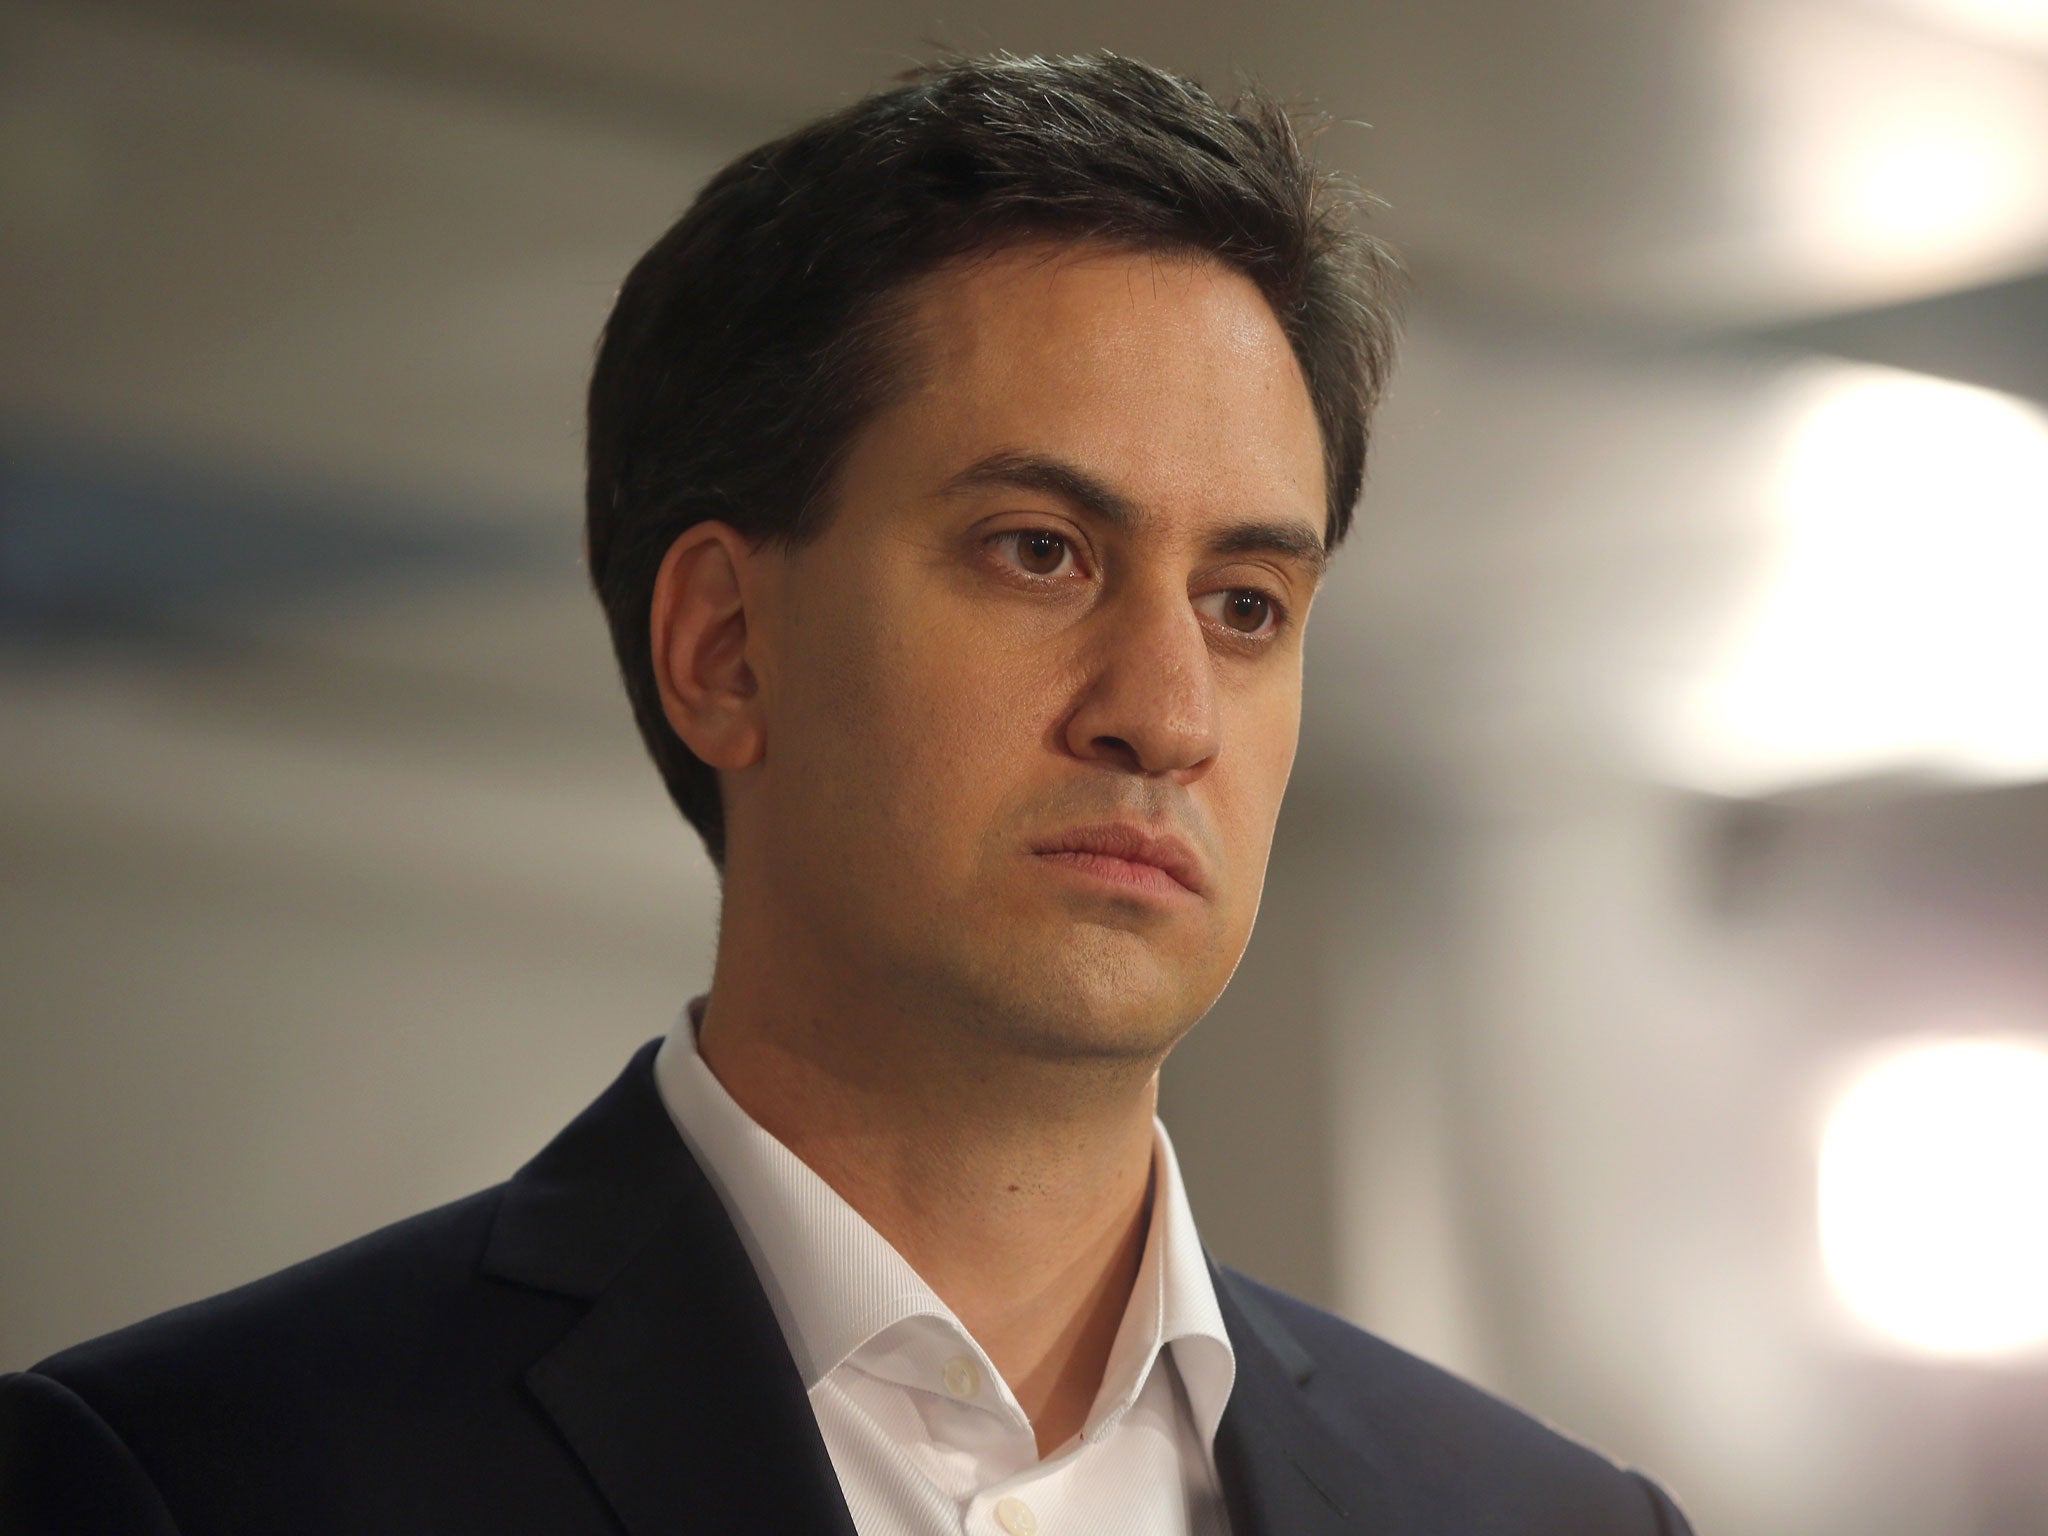 Miliband needed within months of his election as leader to demonstrate his independence